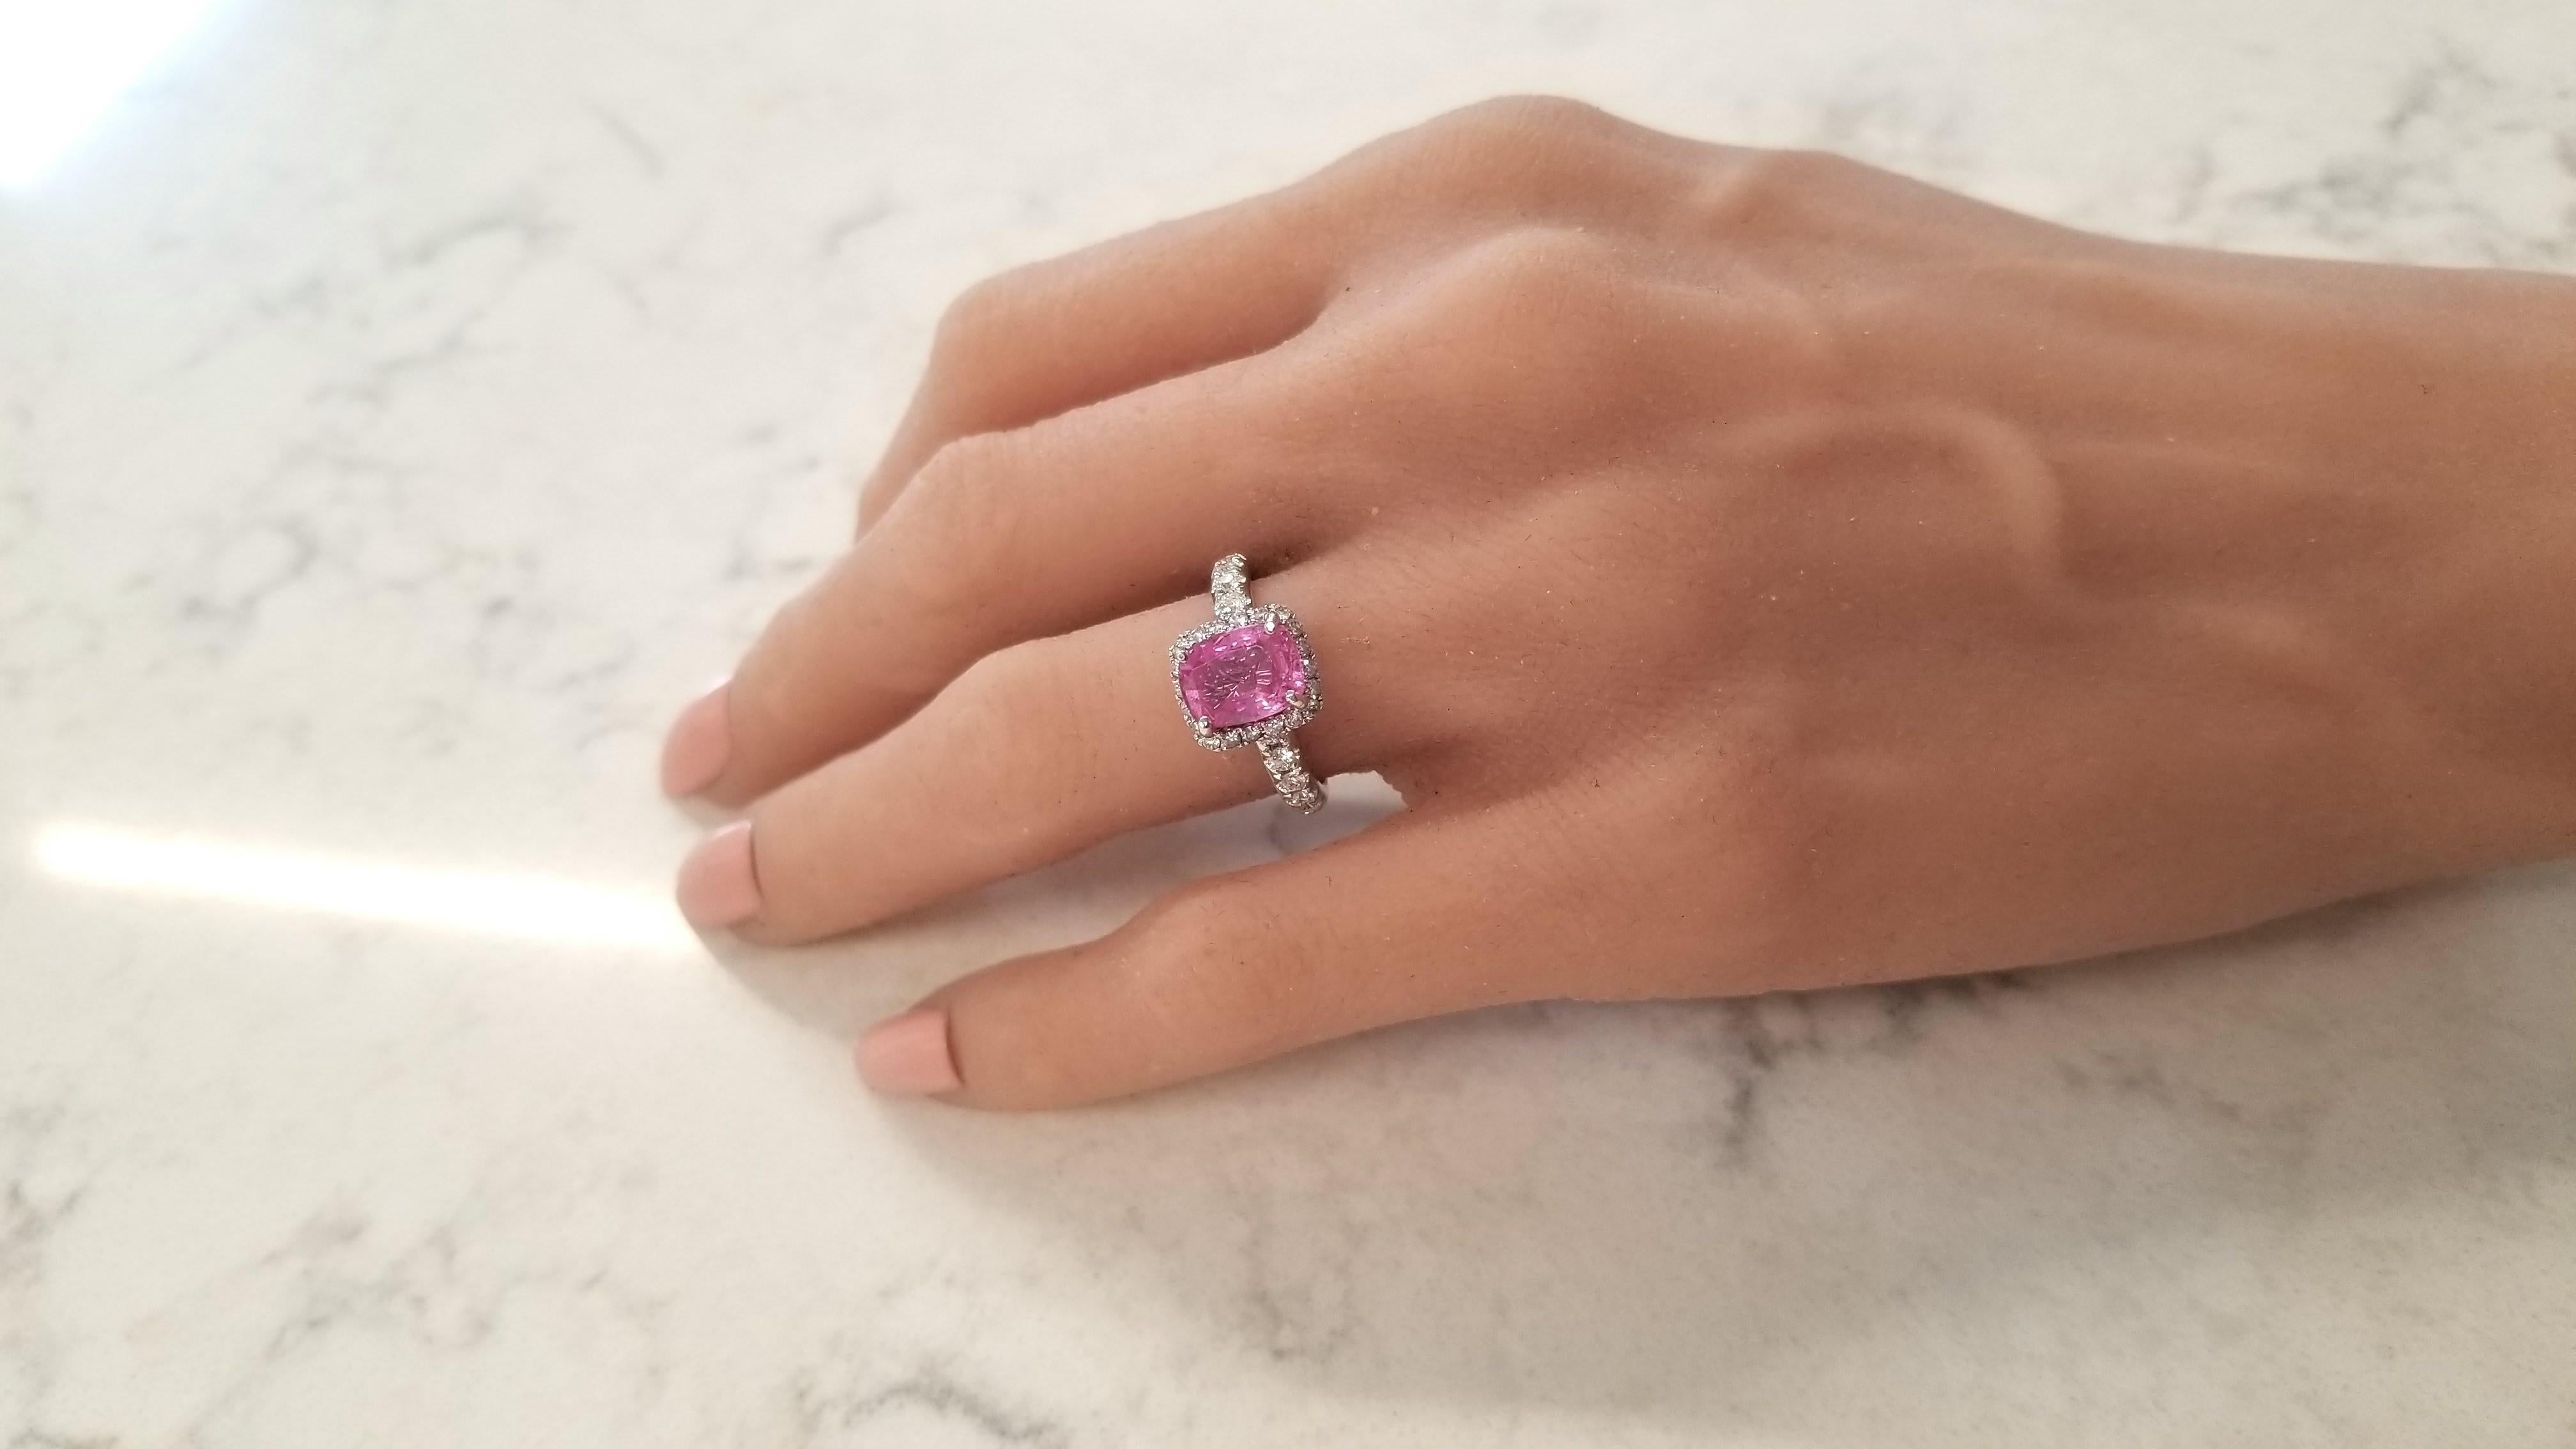 This is a 2.24 carat cushion cut pink sapphire that measures 8.75 x 6.60mm. The intense bubble gum pink sapphire is from Sri Lanka. It's saturation, transparency, and luster are excellent. This gorgeous sapphire is surrounded by 30 prong set round